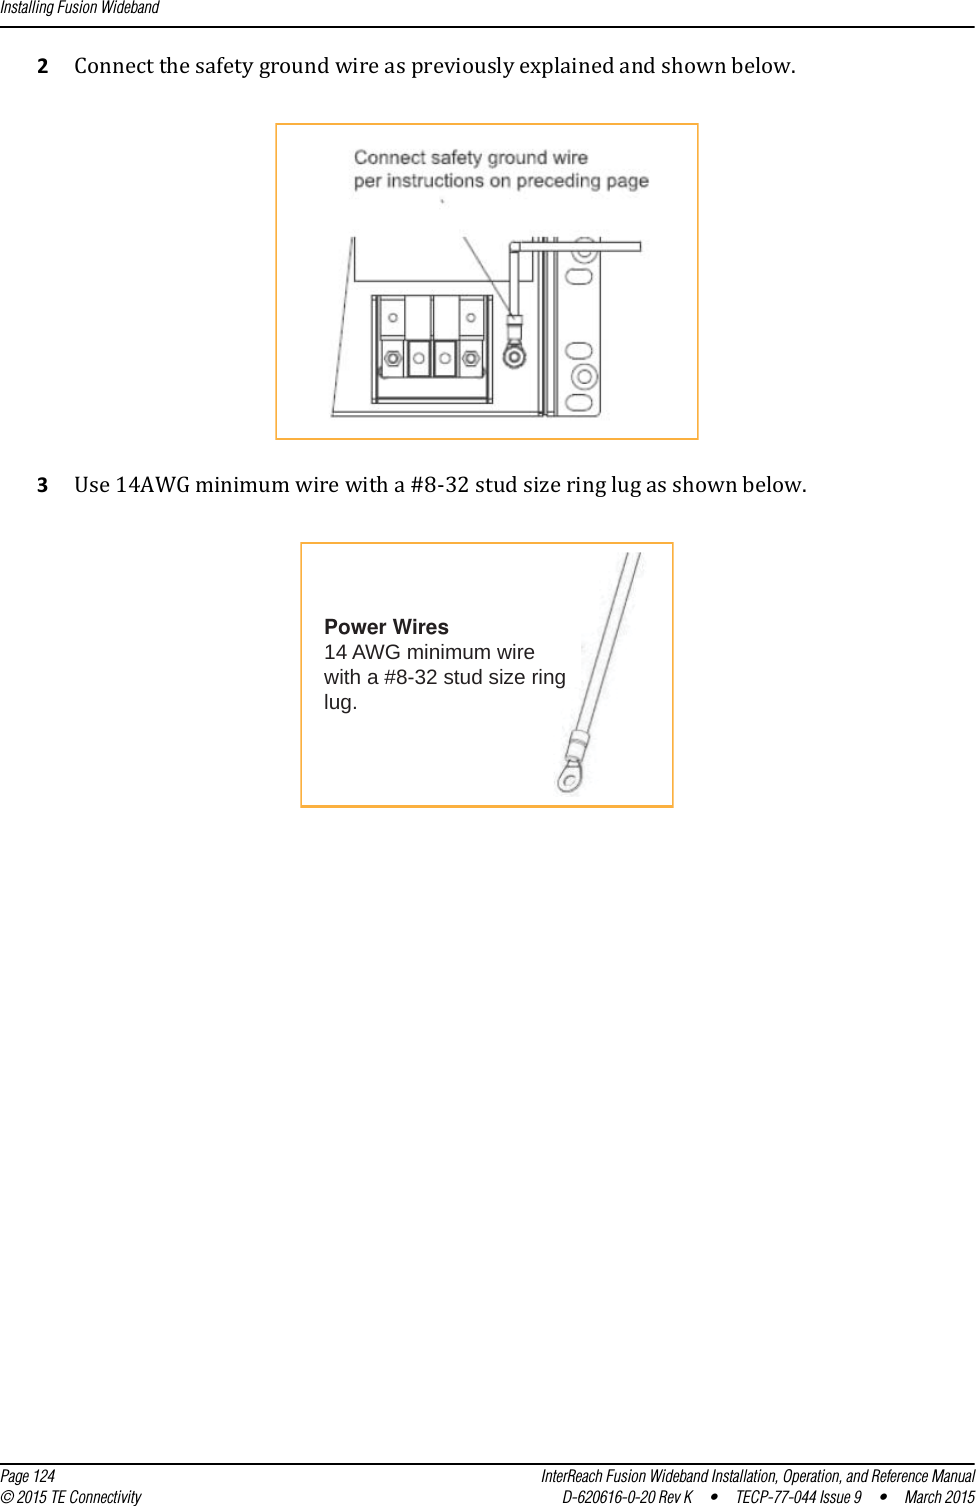 Installing Fusion Wideband  Page 124 InterReach Fusion Wideband Installation, Operation, and Reference Manual© 2015 TE Connectivity D-620616-0-20 Rev K  •  TECP-77-044 Issue 9  •  March 20152Connect the safety ground wire as previously explained and shown below. 3Use 14AWG minimum wire with a #8-32 stud size ring lug as shown below.Power Wires14 AWG minimum wirewith a #8-32 stud size ringlug.